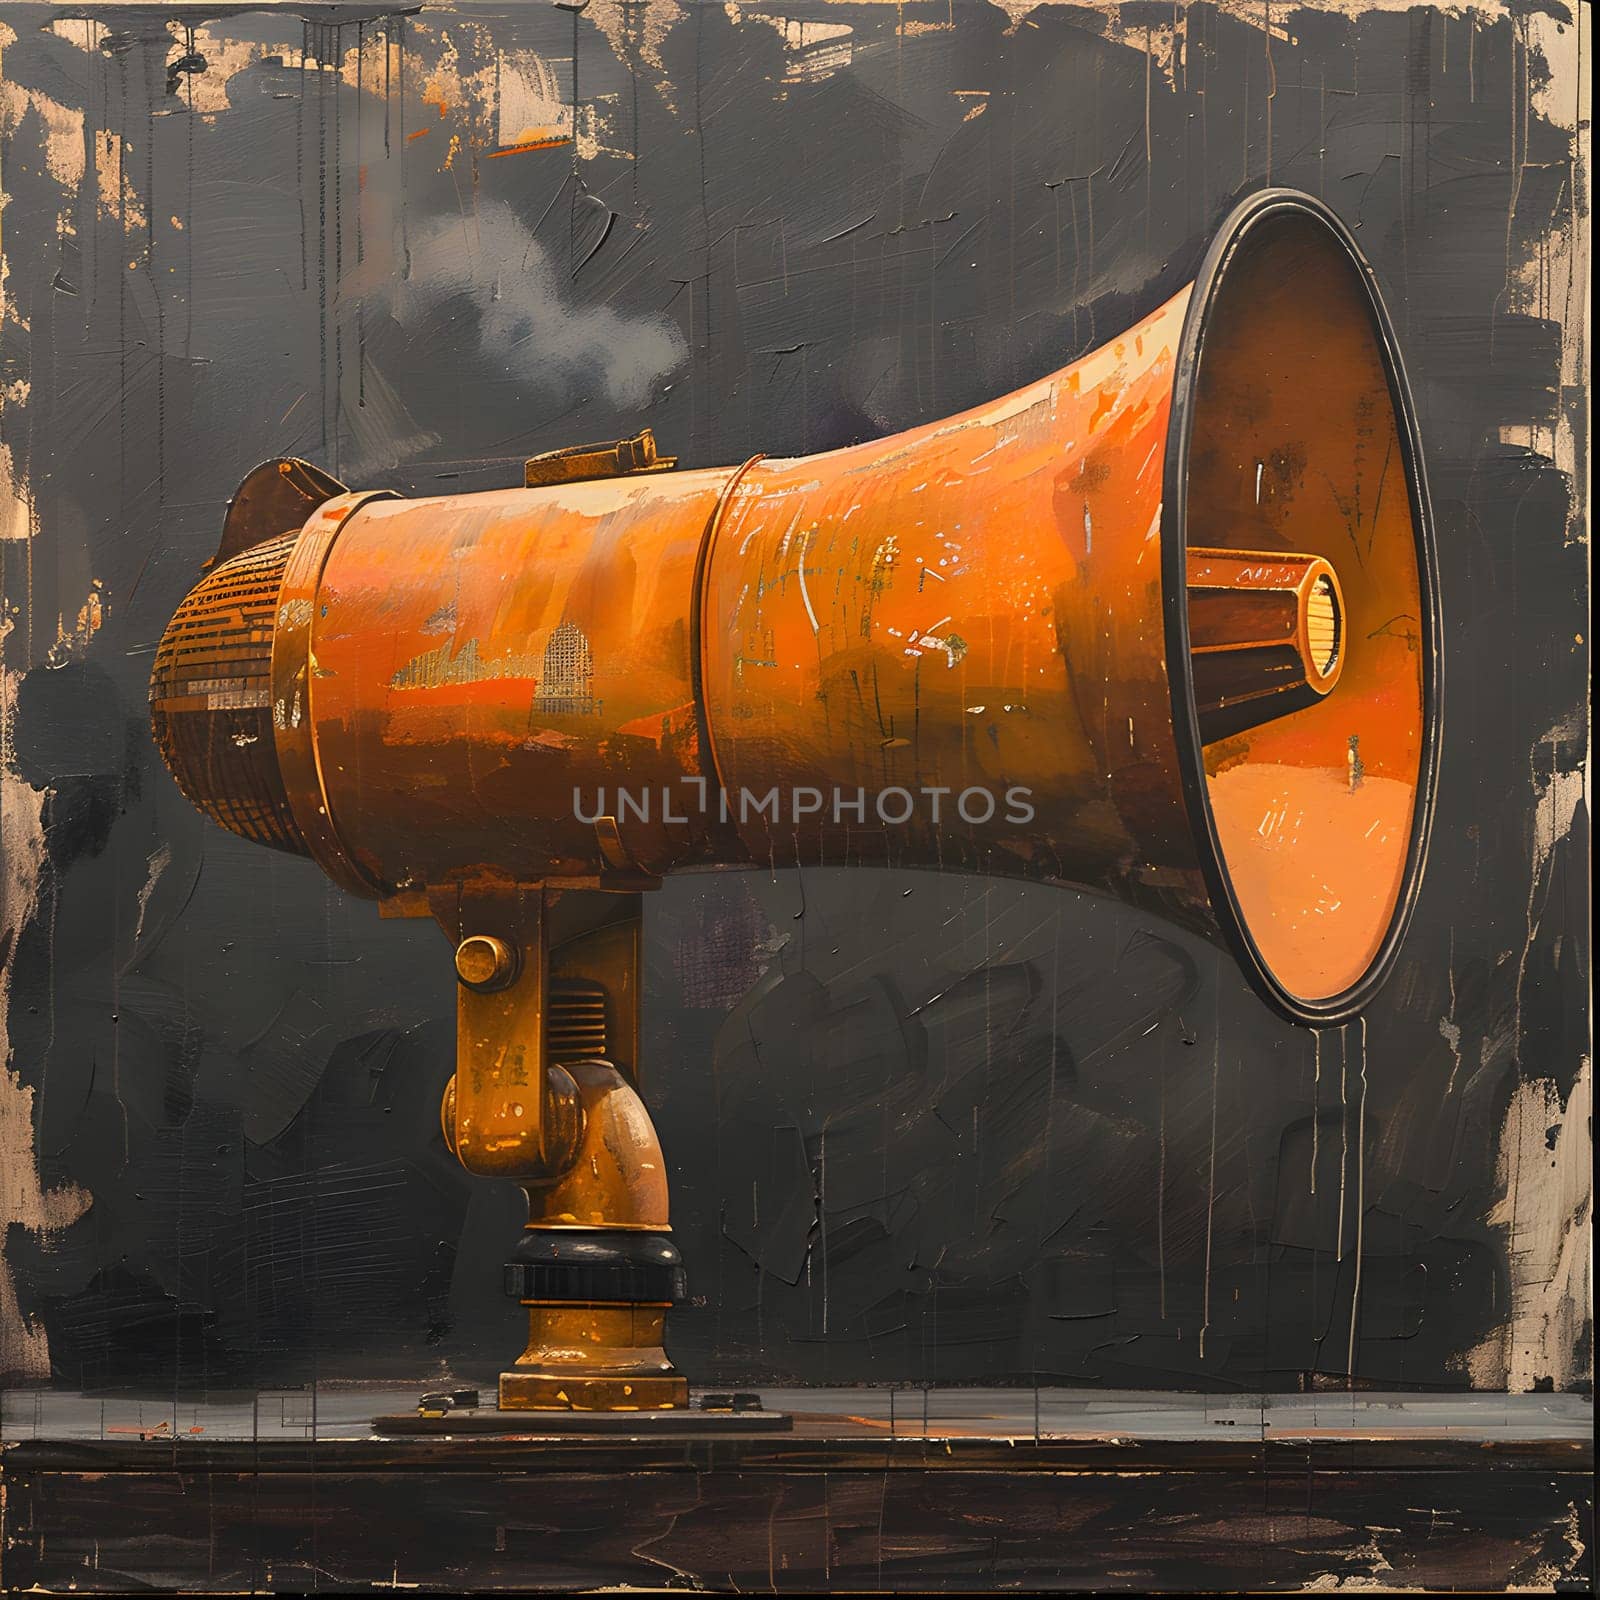 A still life photography image of an orange megaphone against a black background, showcasing the fluid interaction between the metal, wood, and cylinder shape